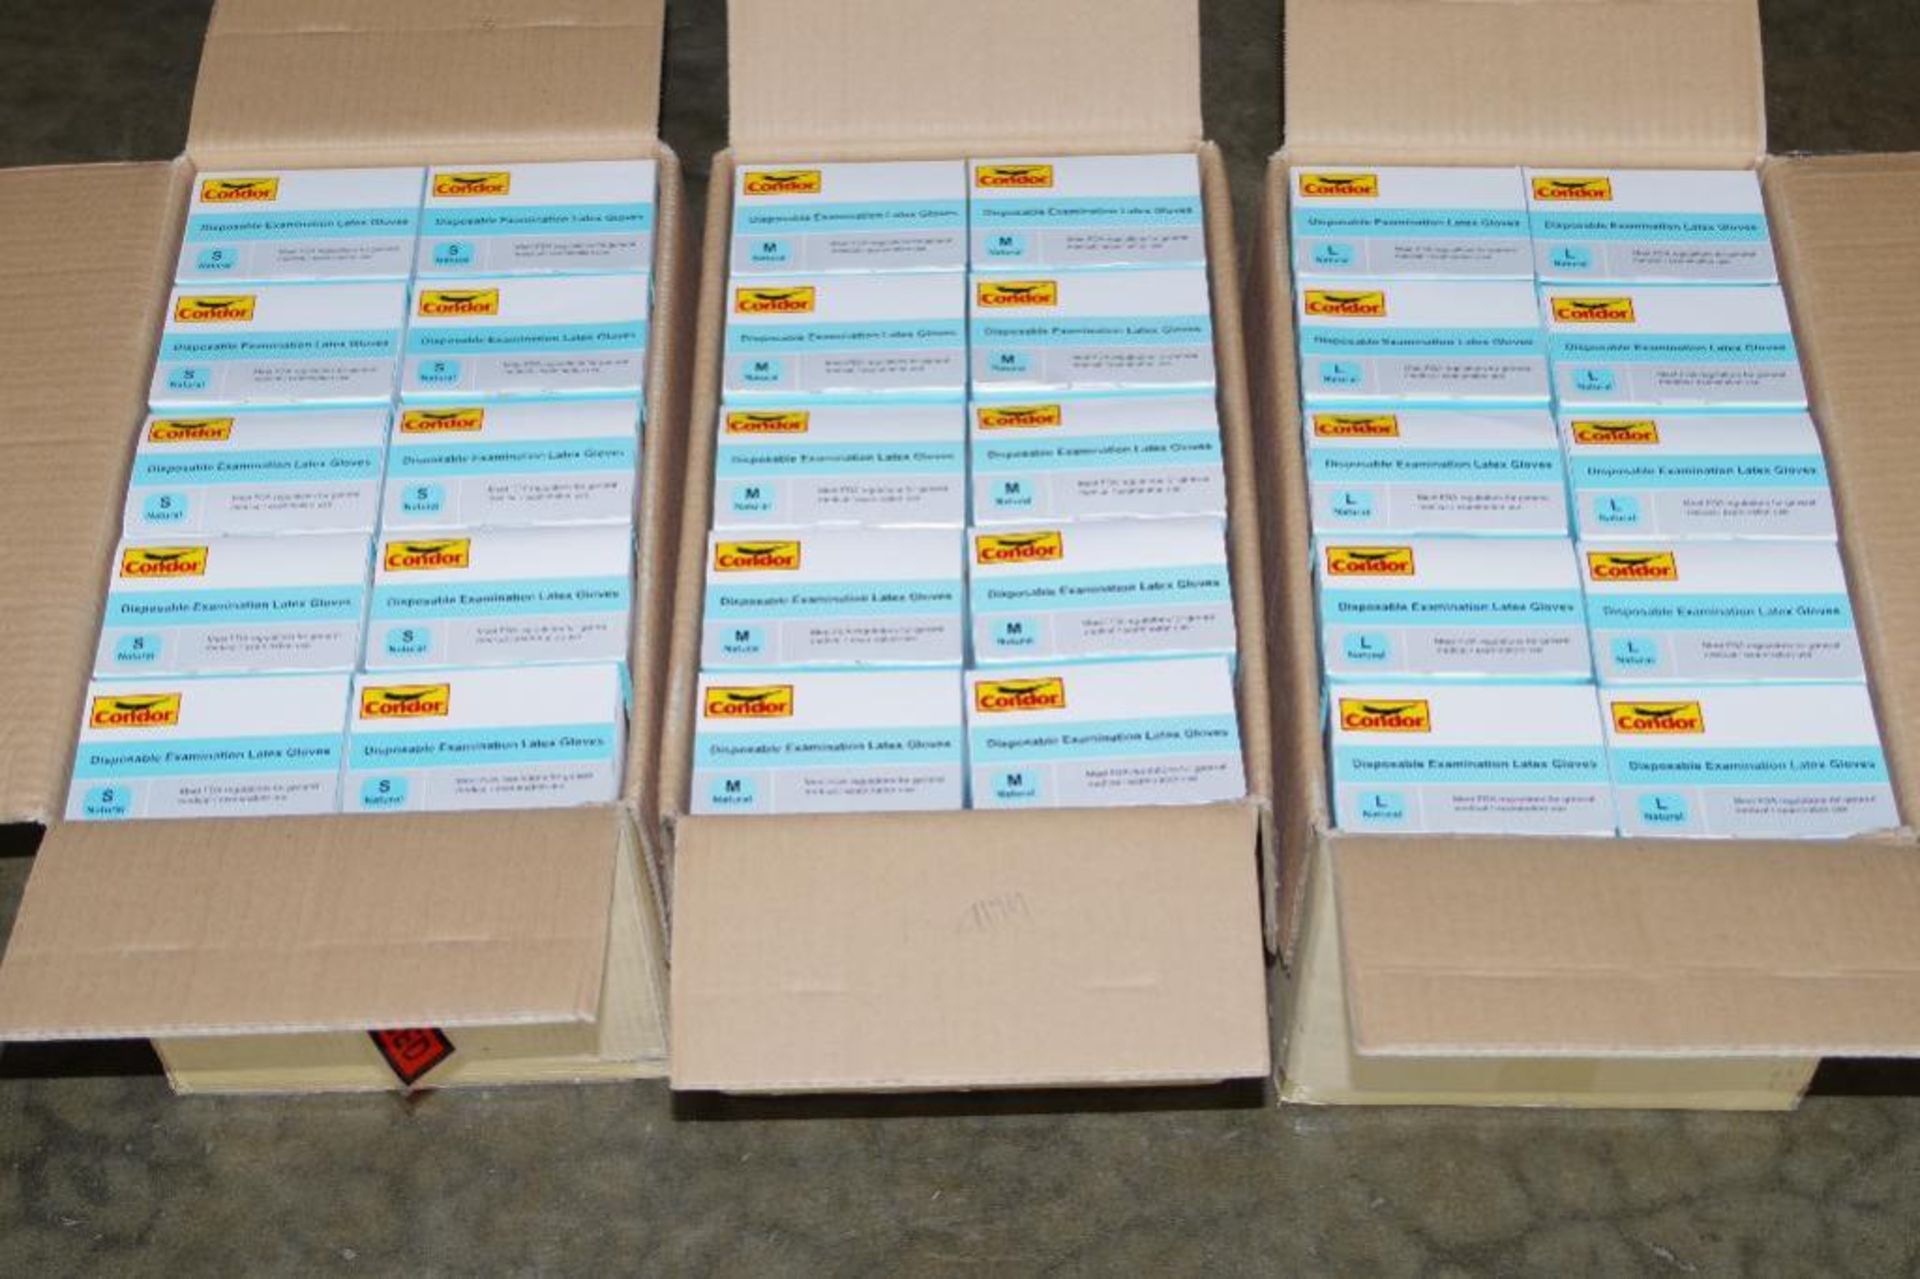 (3) Cases of CONDOR Disposable Examination Latex Gloves Sizes, S, M & L (3 Cases of 1000) - Image 2 of 5